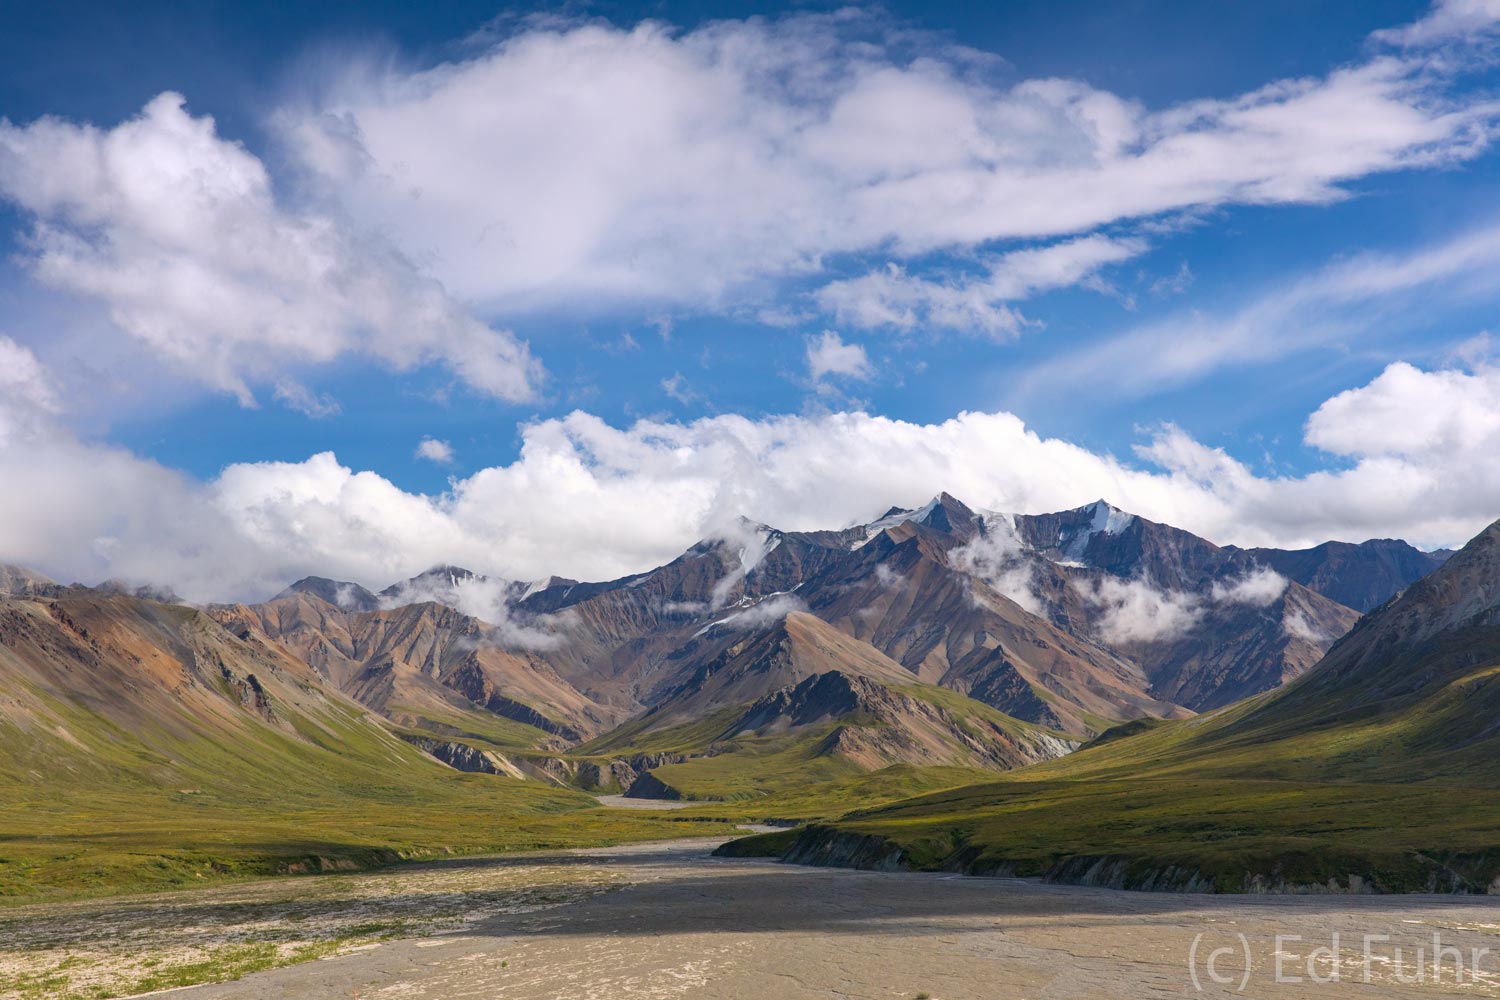 Denali National Park is amazing not only because of its massive mountains but also because of its massive, rich valleys that...